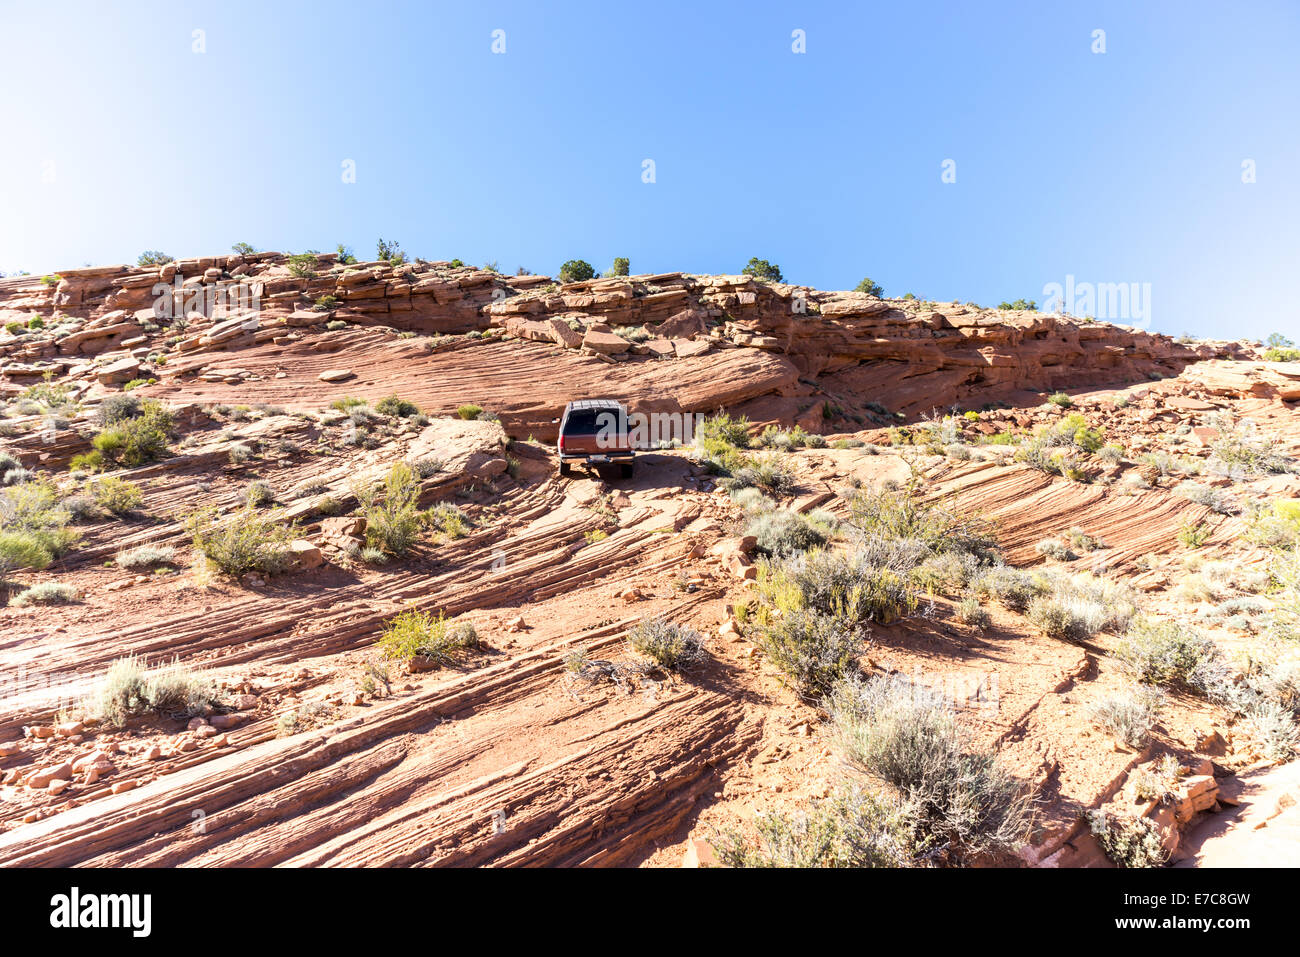 Off road access to Hunt's Mesa, Monument Valley USA Stock Photo